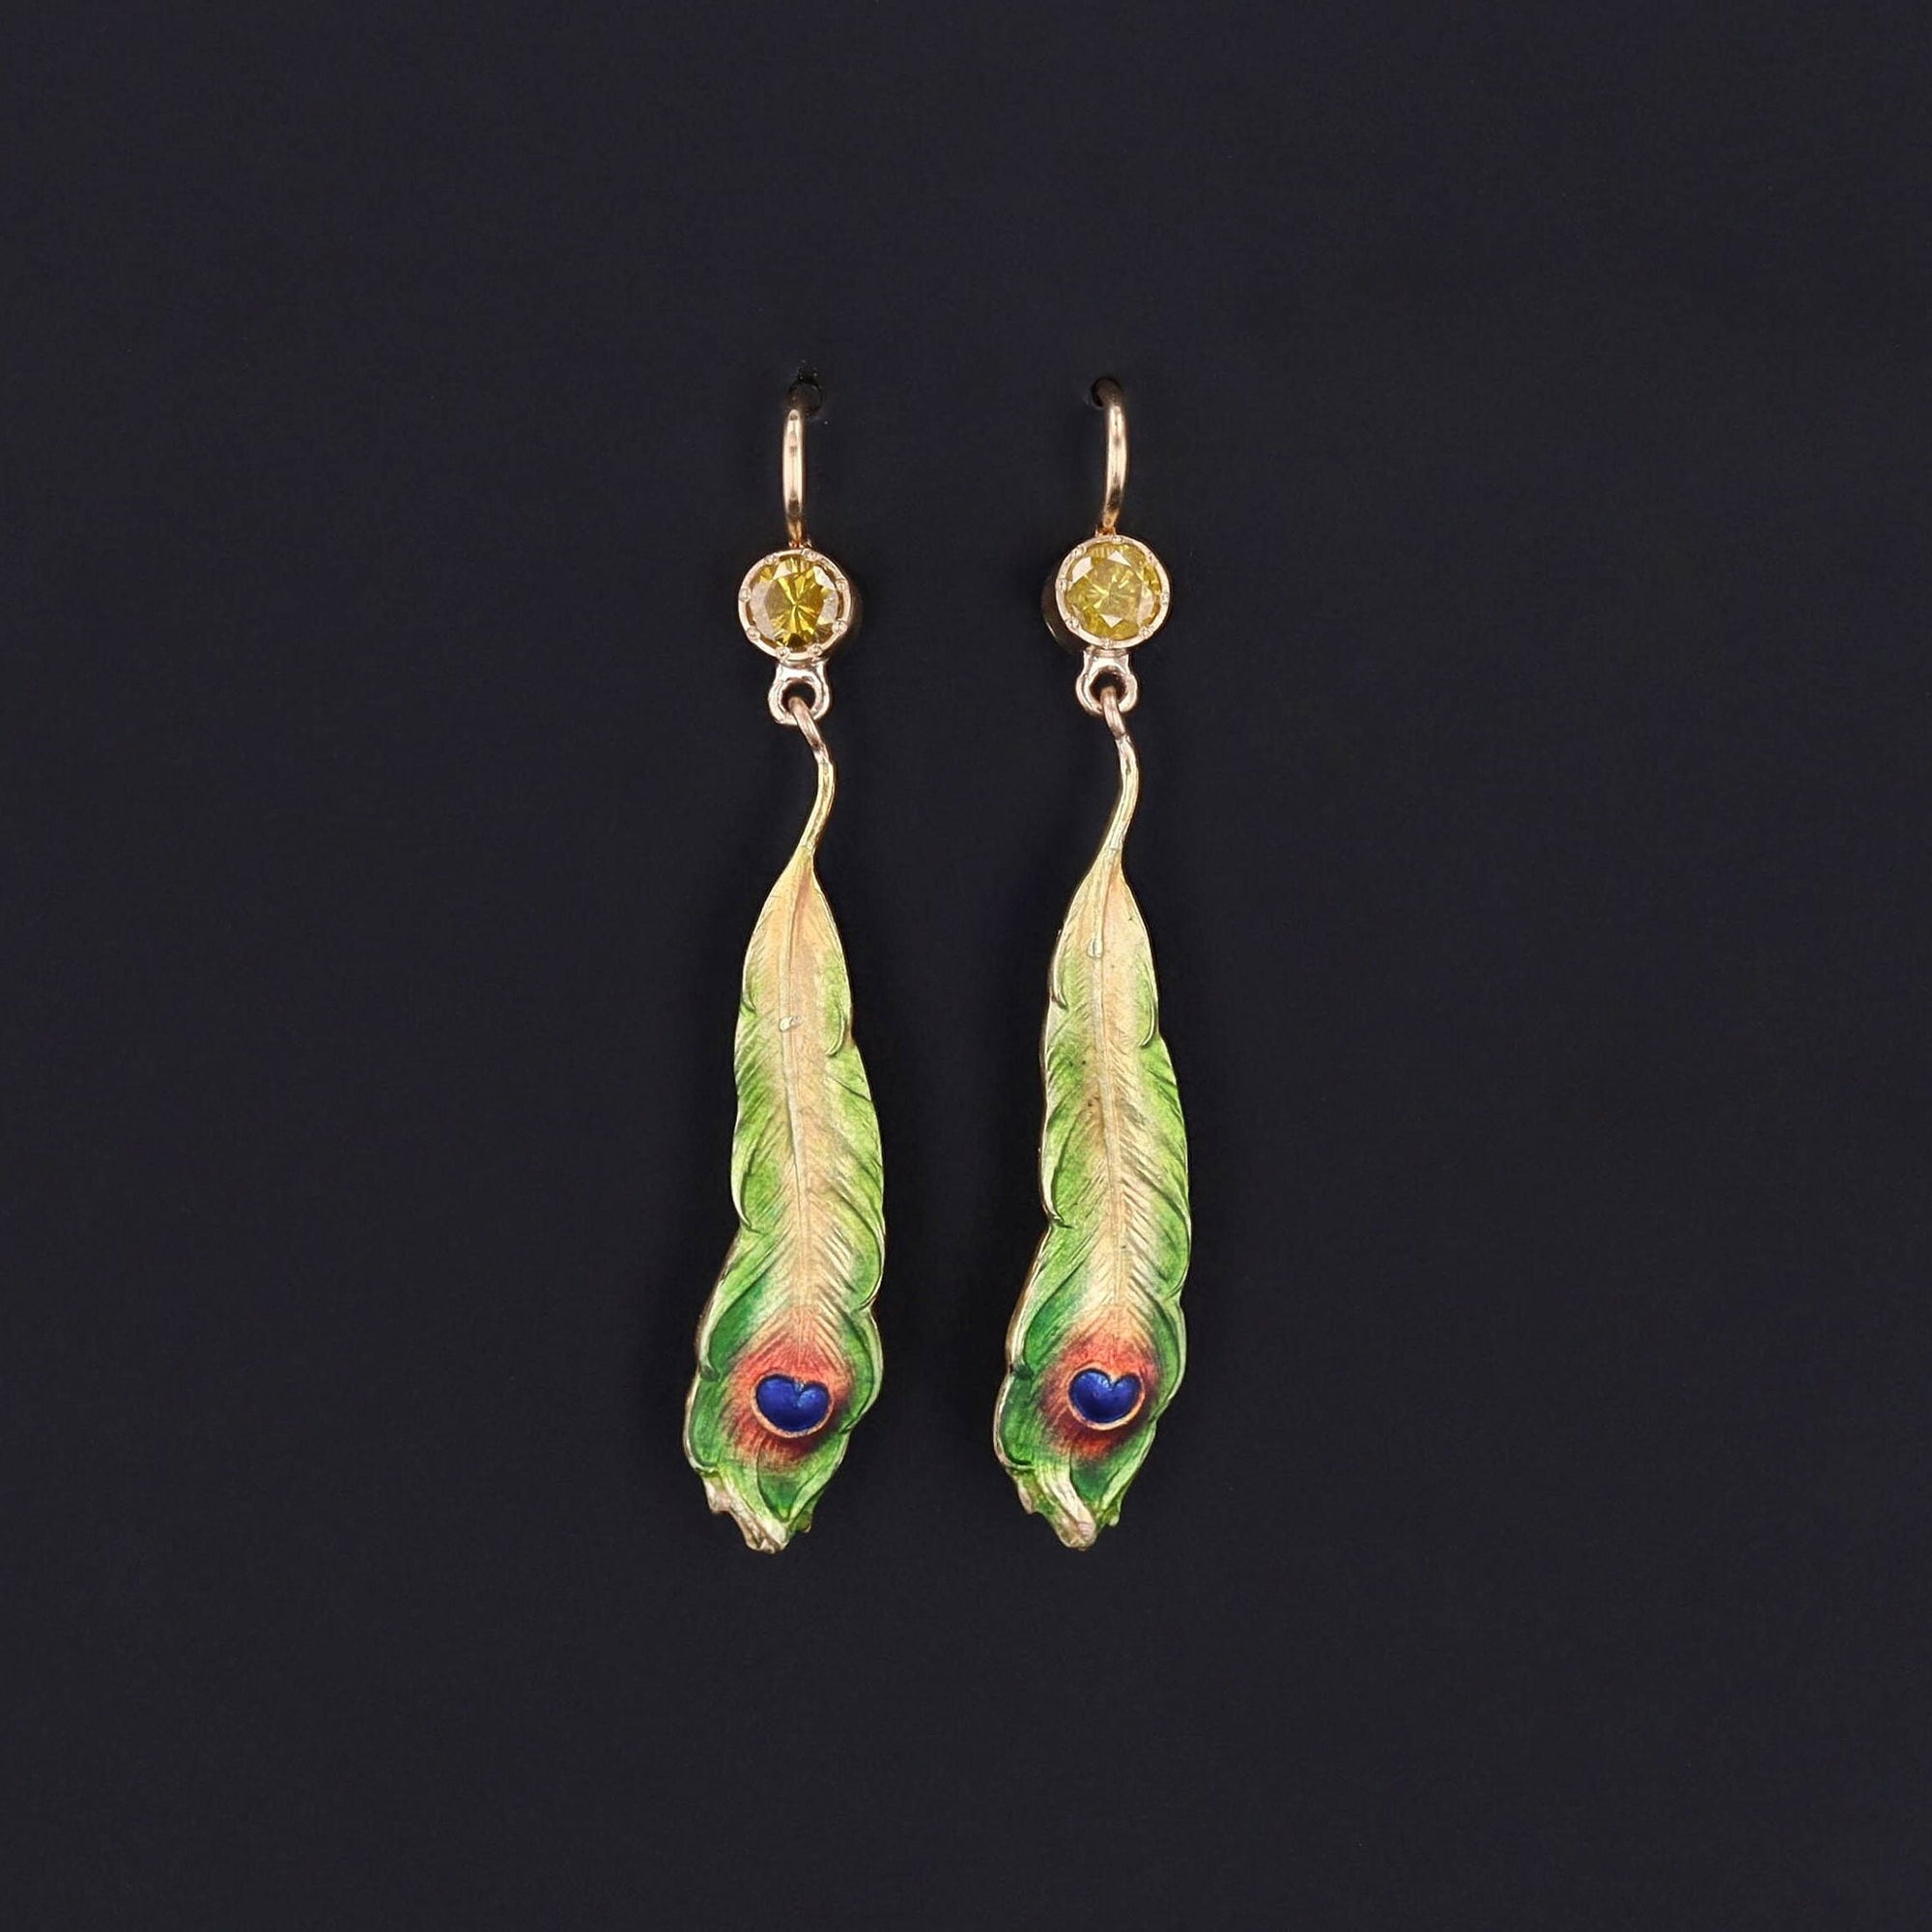 Peacock Feather Earrings | Antique Pin Conversion Earrings 